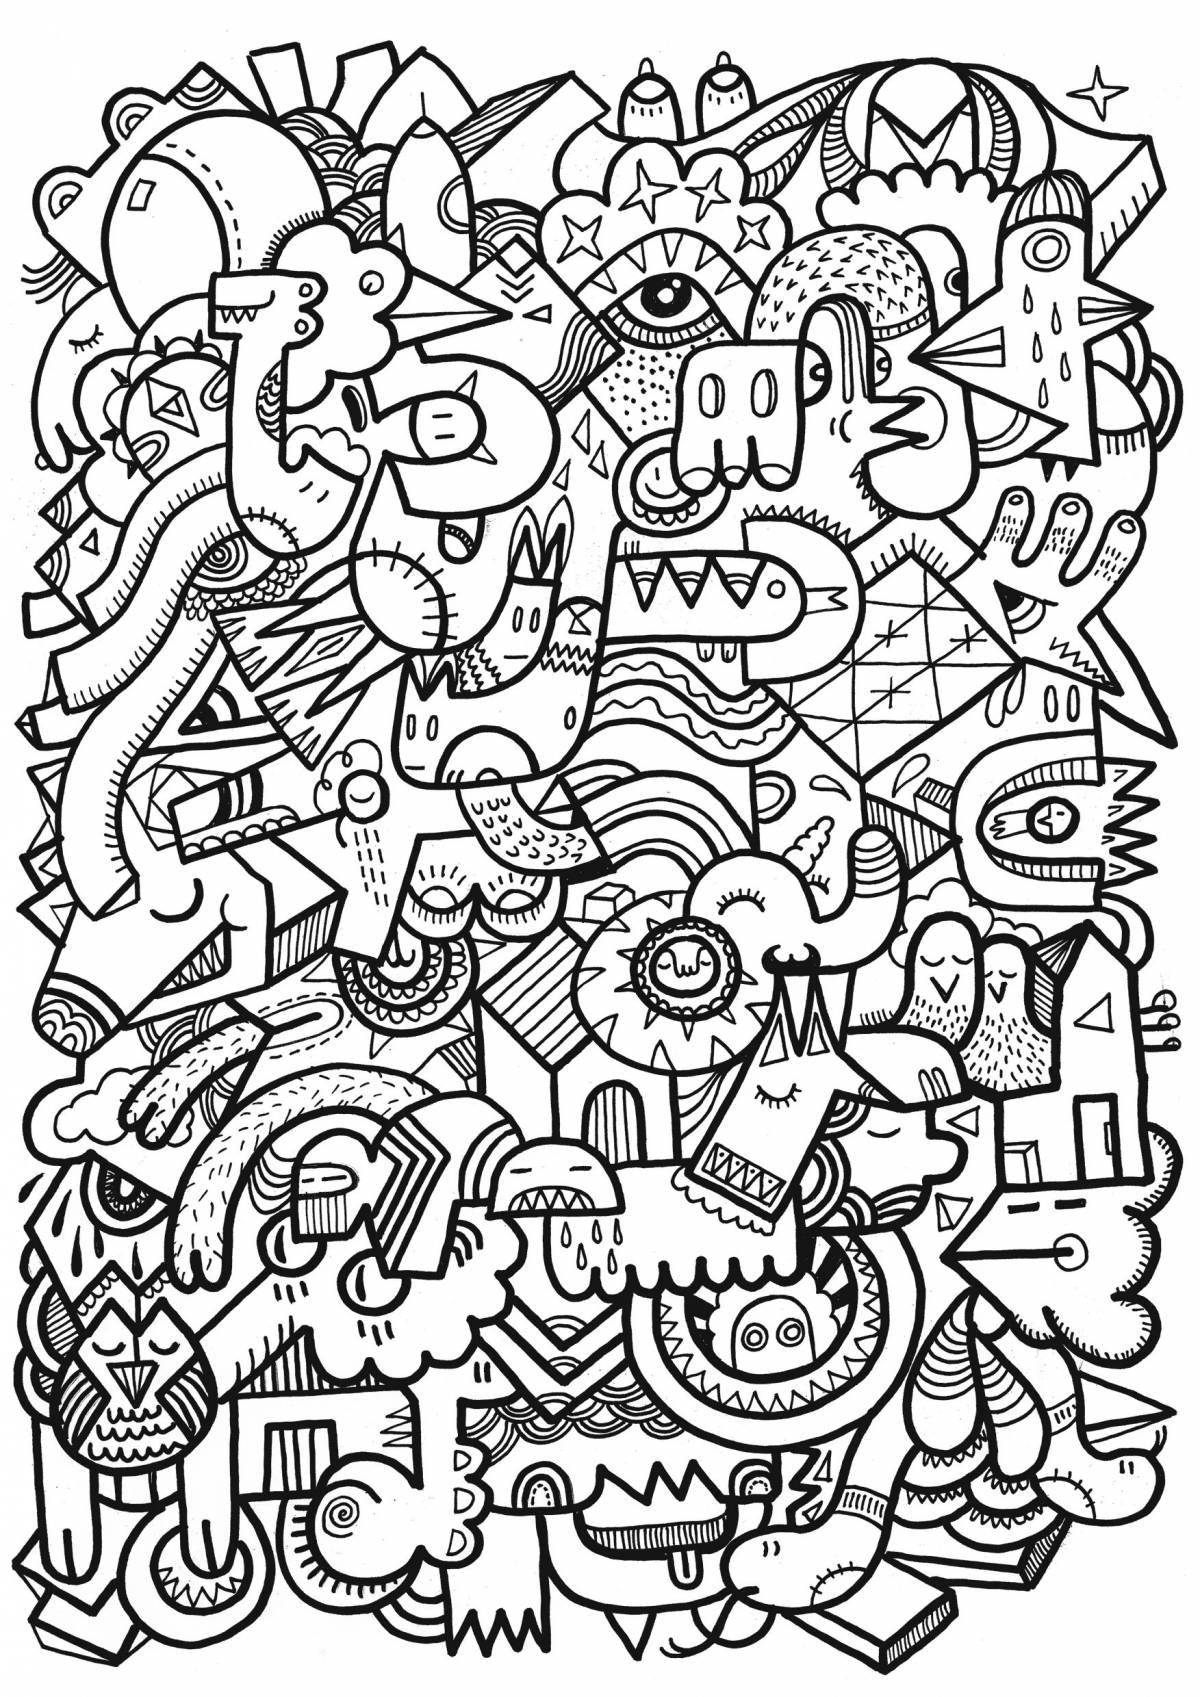 Decorated coloring page with many details